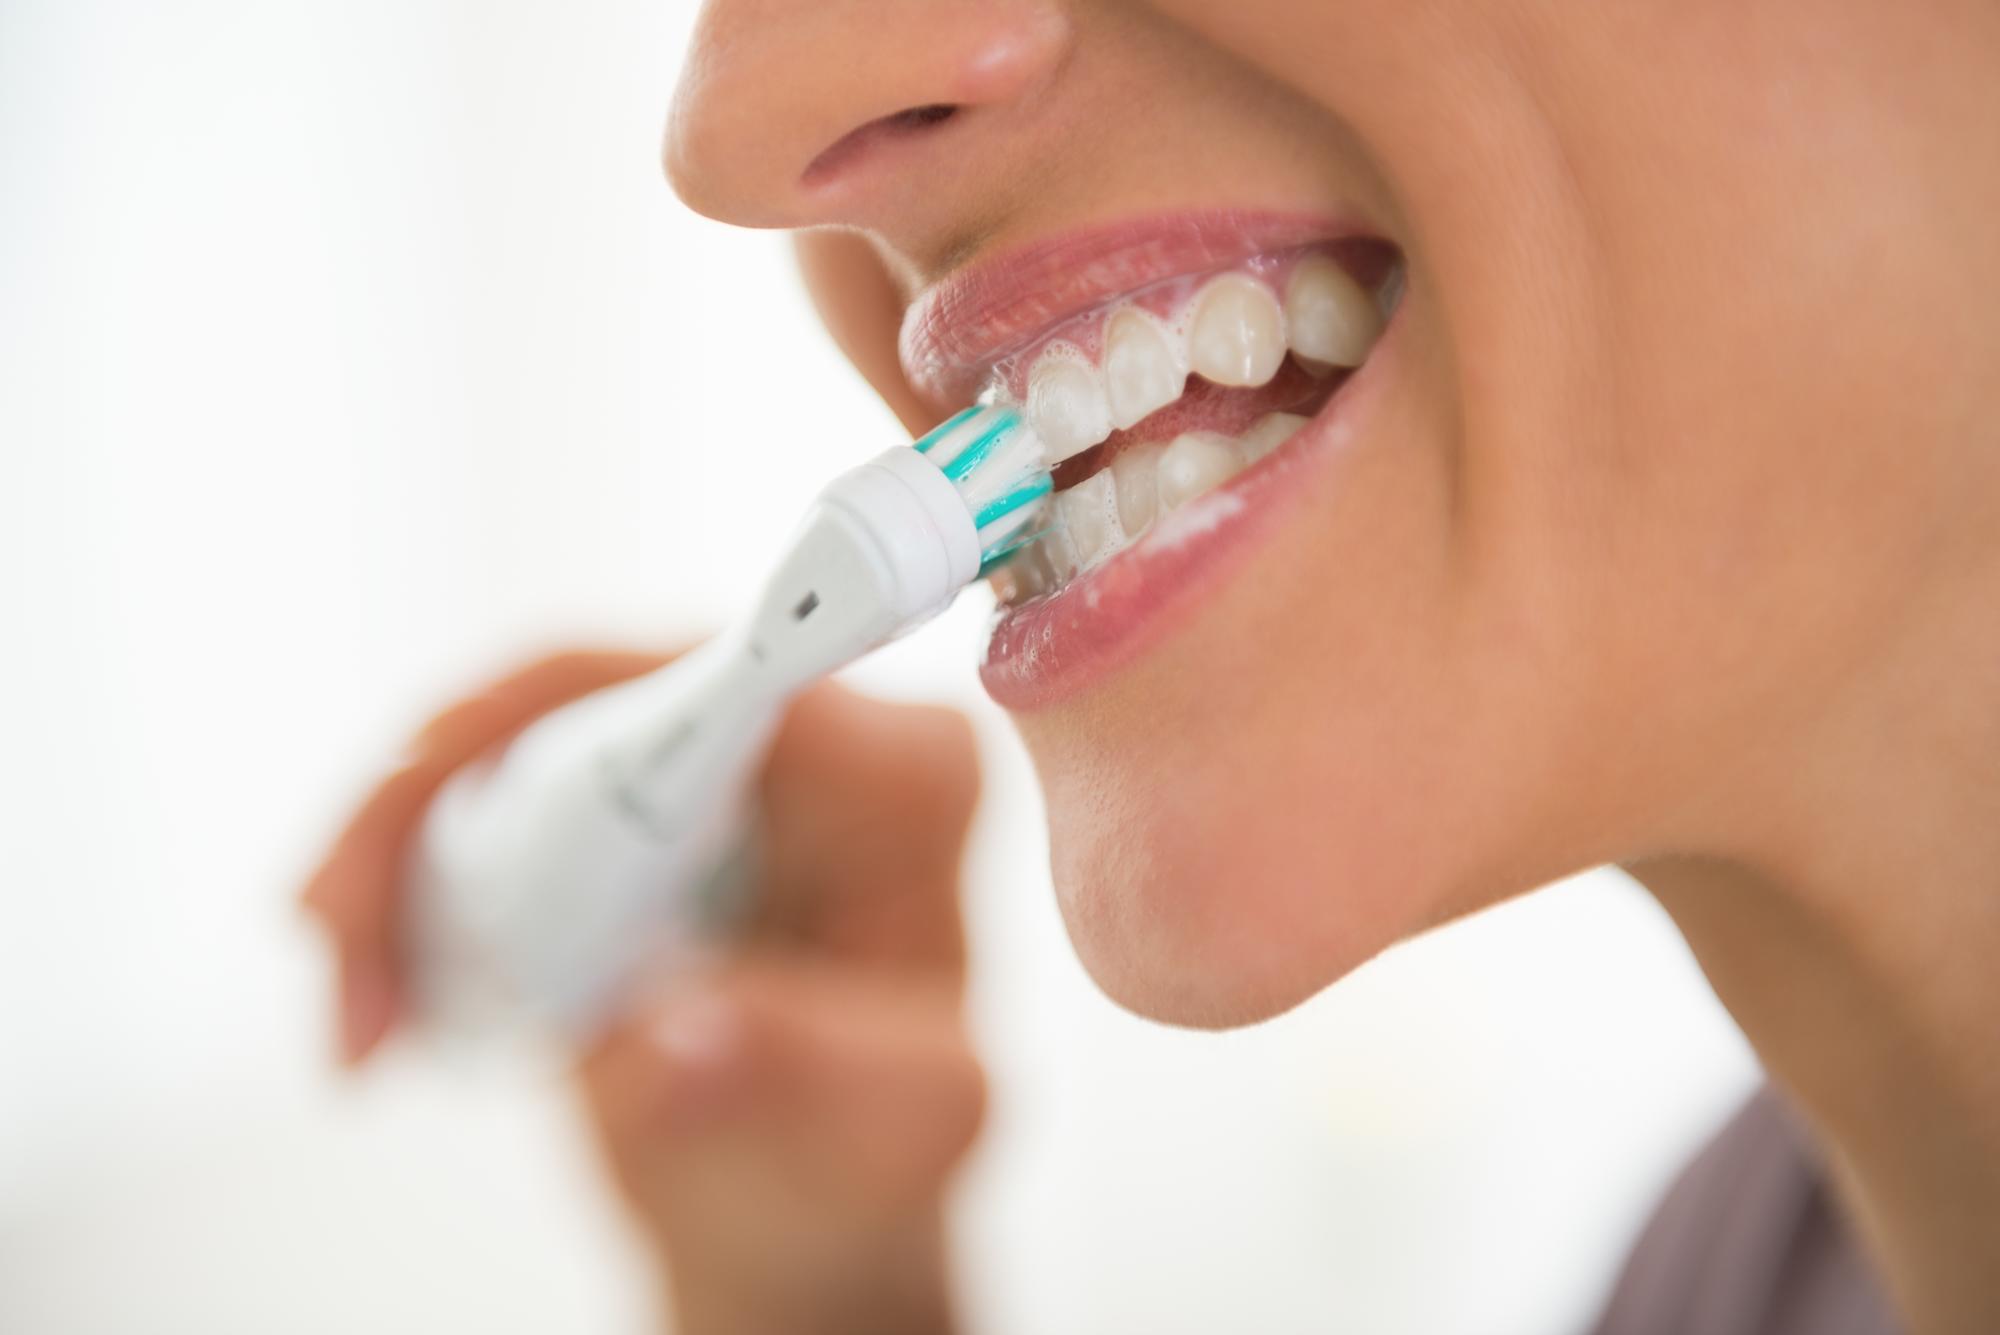 Oral hygiene could be 'life-saving' amid the pandemic, experts stress